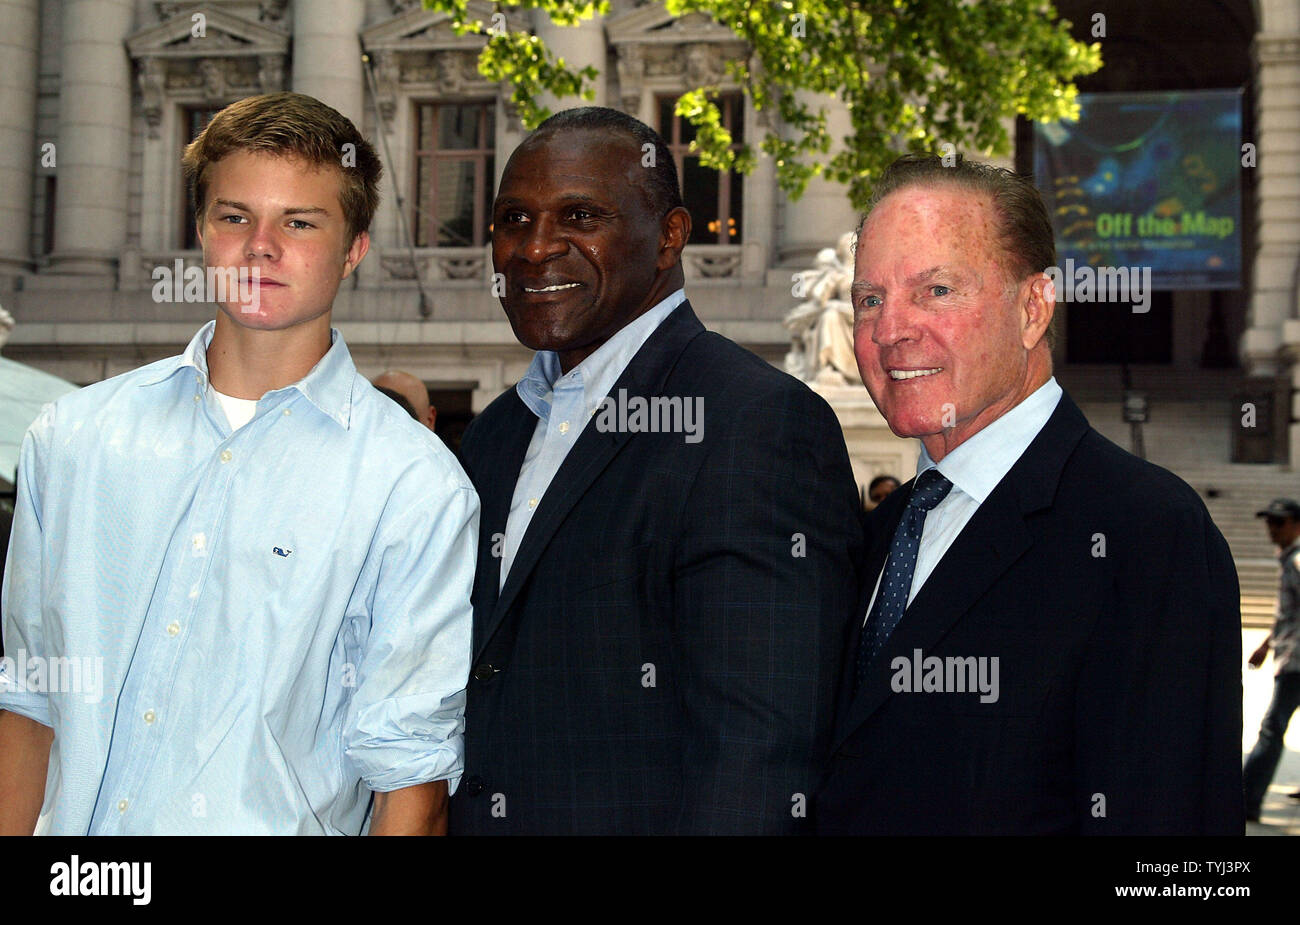 Harry Carson (C) poses with Frank Gifford and son Cody Gifford at the press conference announcing the Partnership between the Pro Football Hall of Fame and the National Sports Museum at Bowling Green Park in New York on June 19, 2007.  (UPI Photo/Laura Cavanaugh) Stock Photo